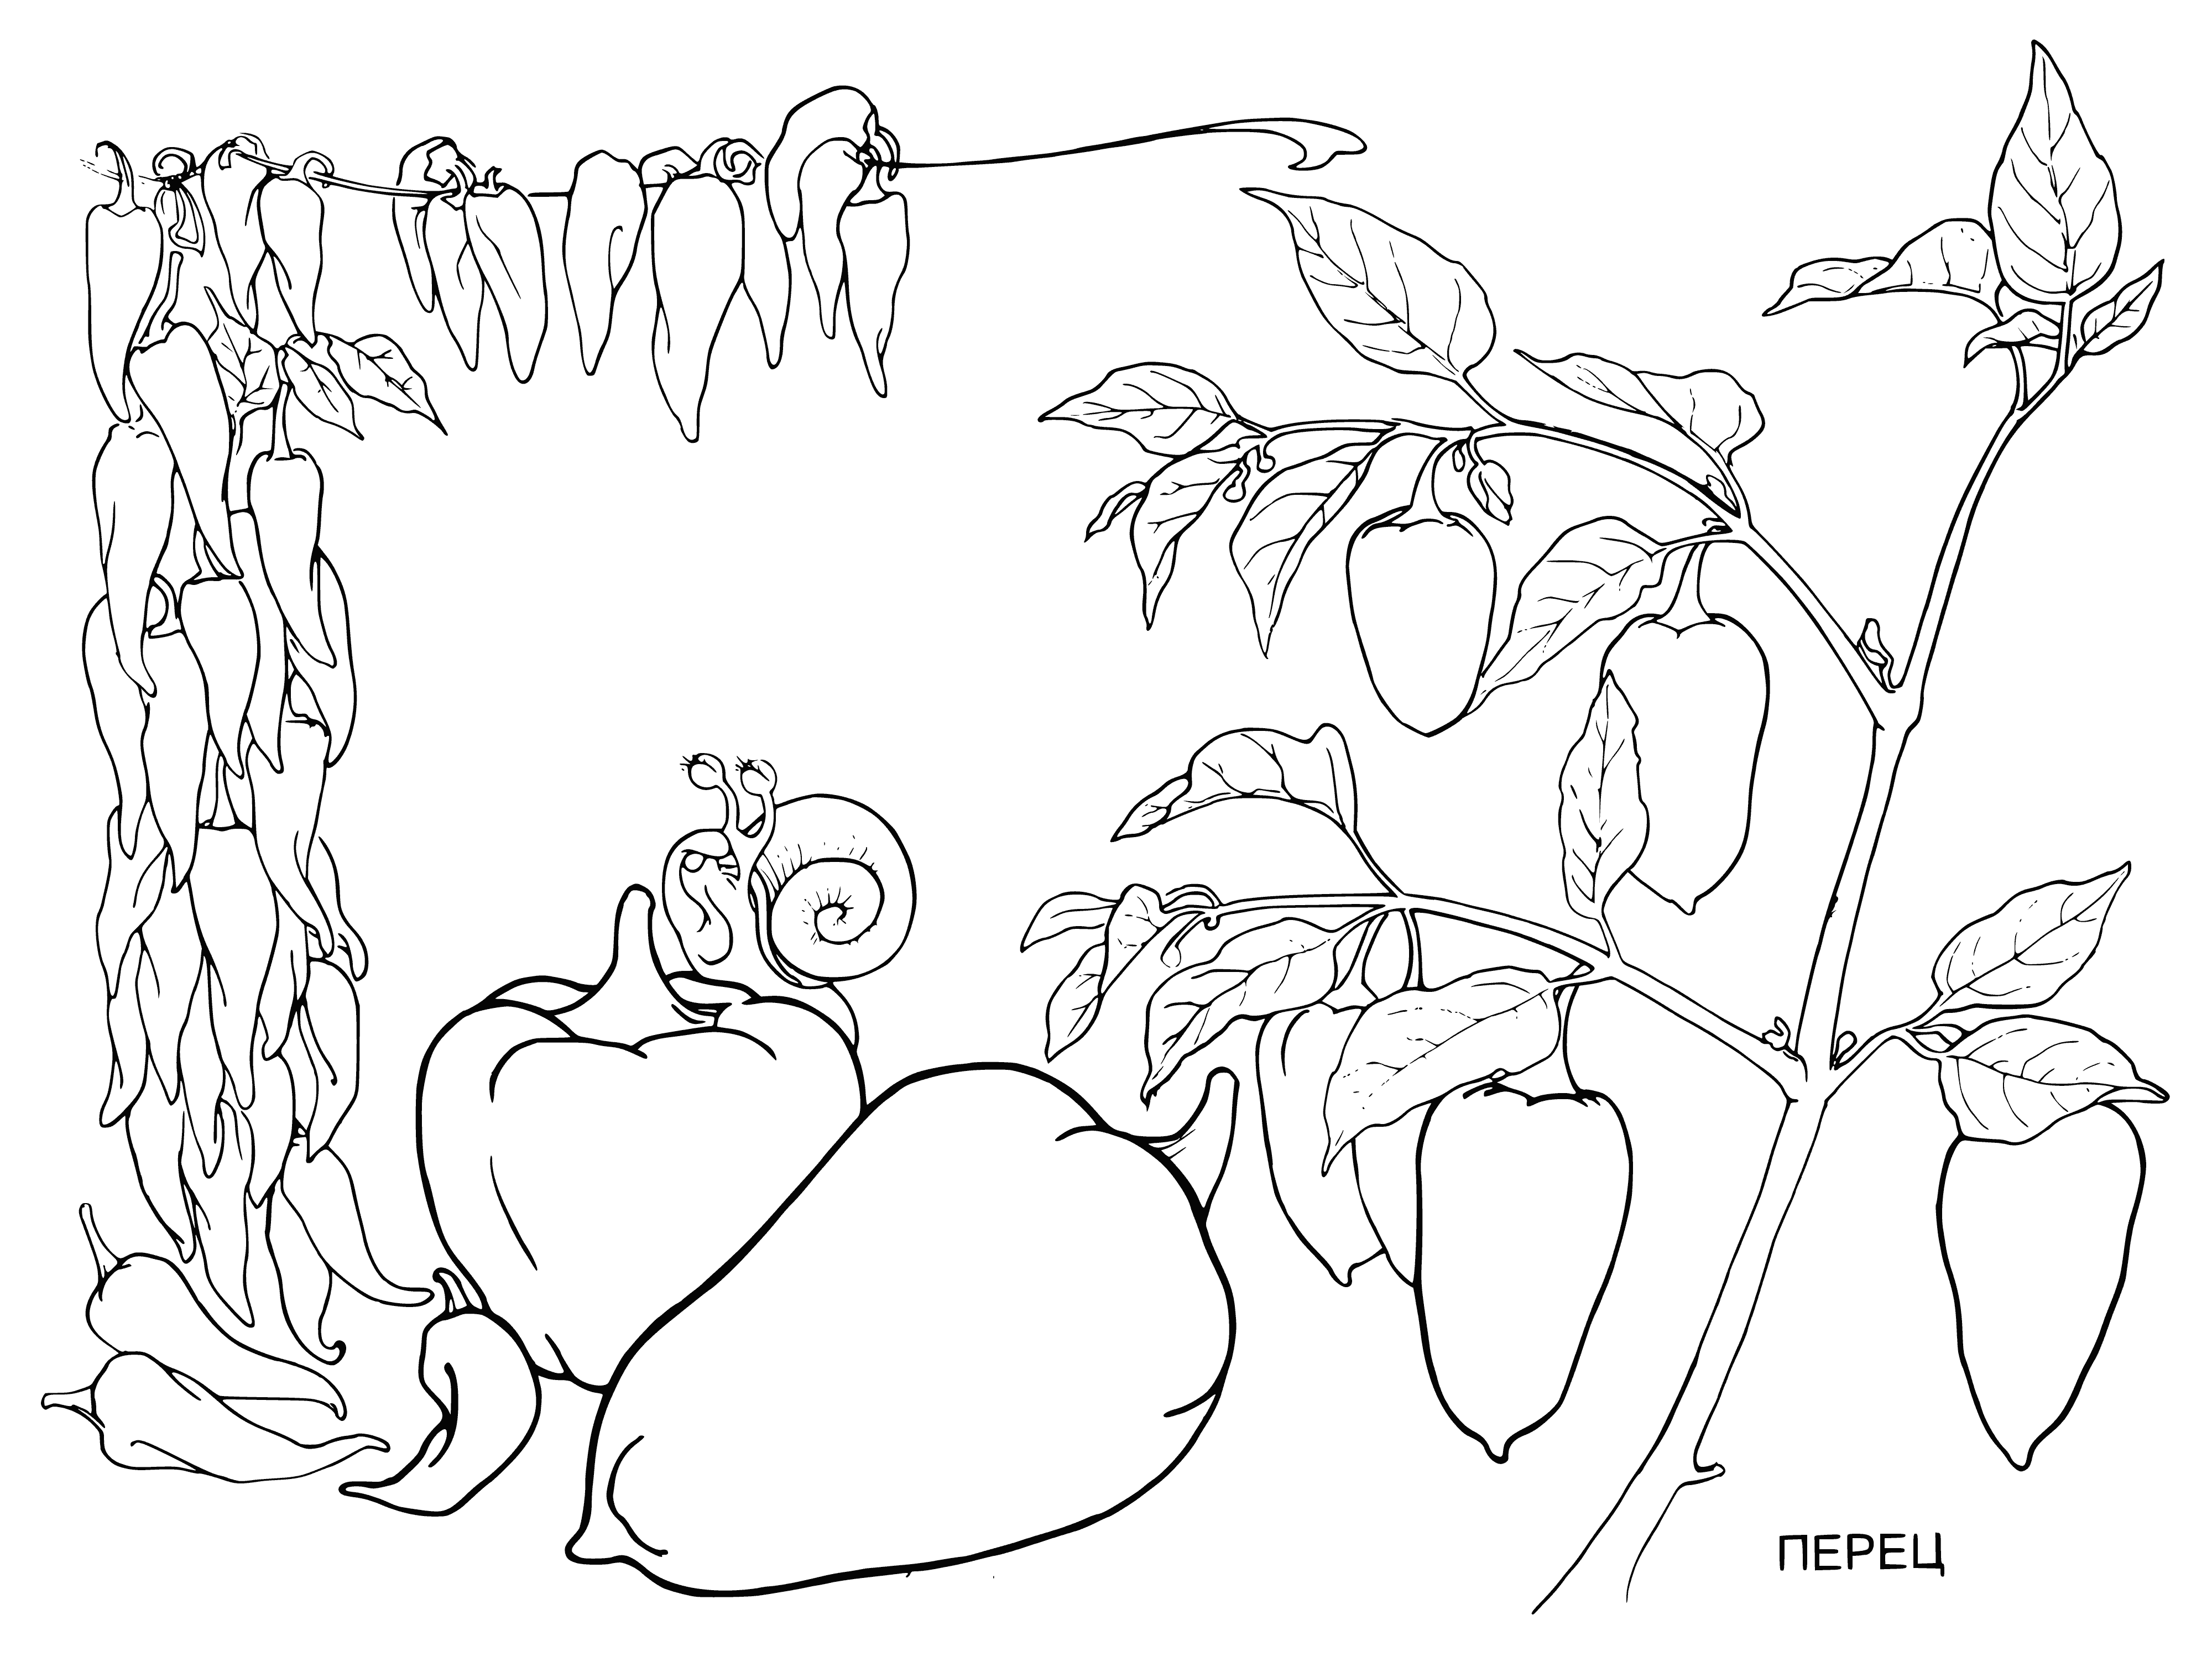 coloring page: Bell peppers are vegetables that come in green, red and yellow, have a bell shape and are a great source of vitamins C and B6.